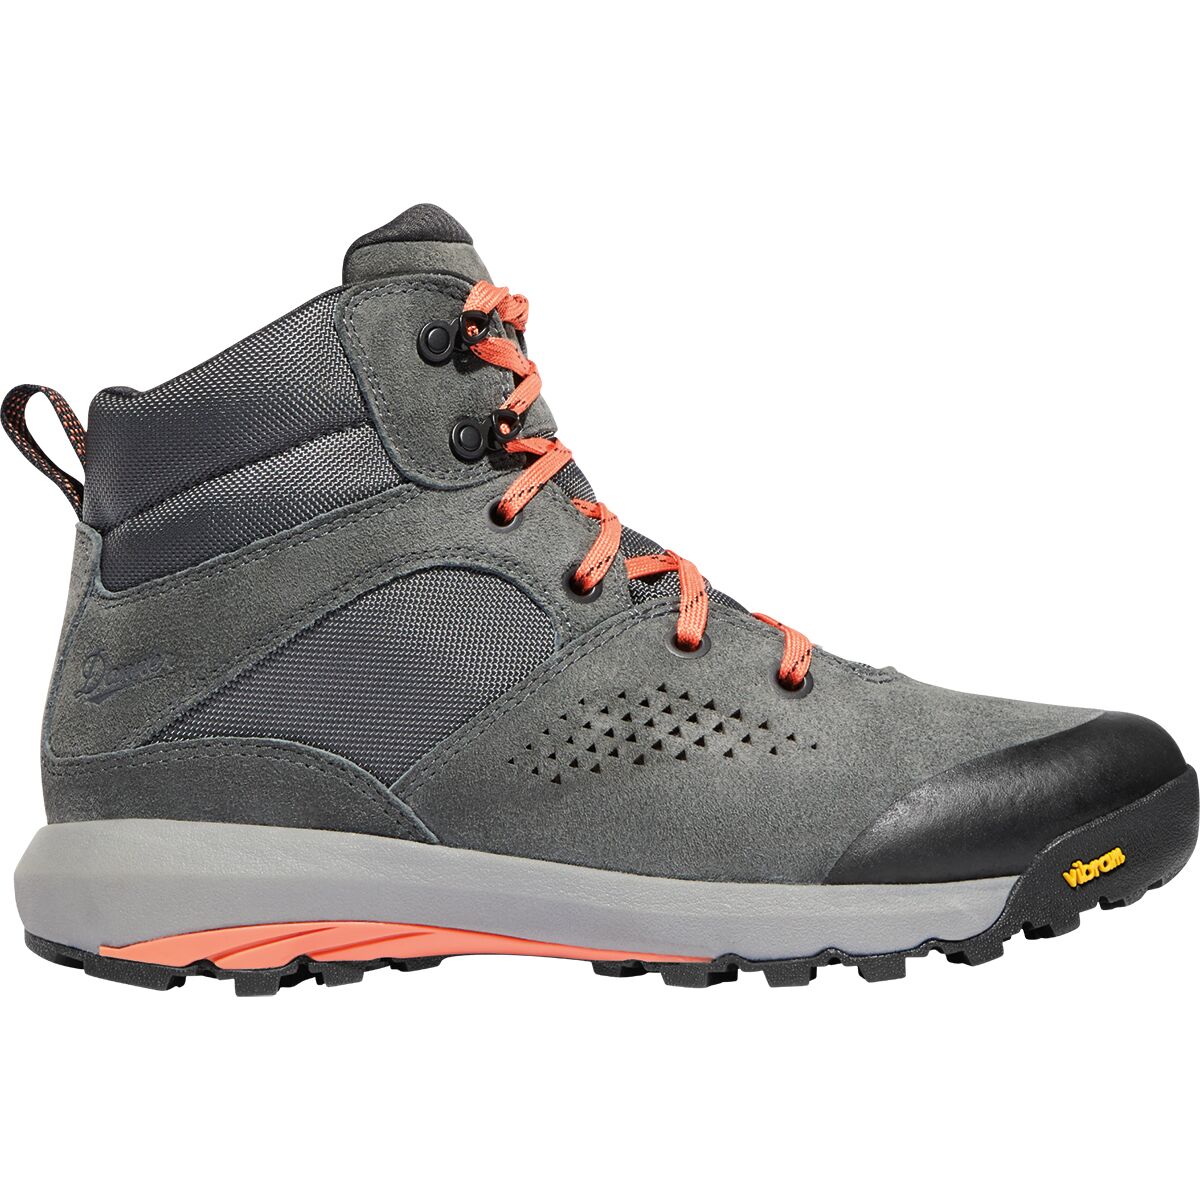 Inquire Mid Hiking Boot - Women